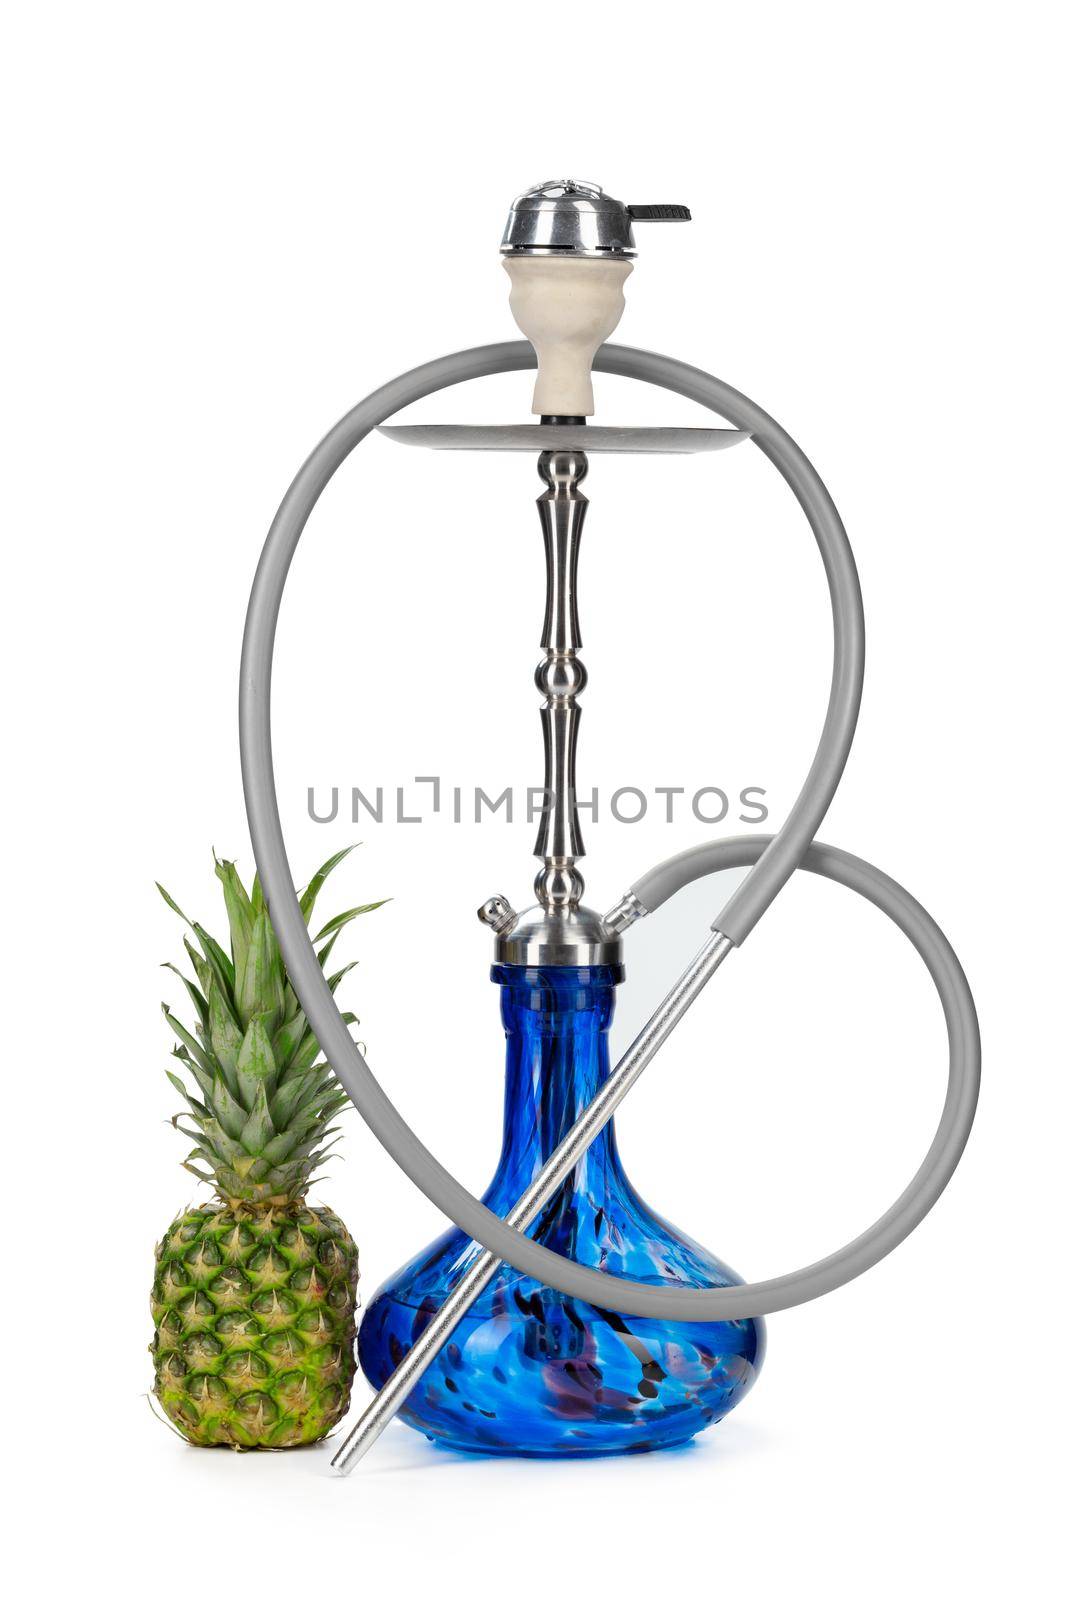 Hookah with fruits isolated on white background by Fabrikasimf